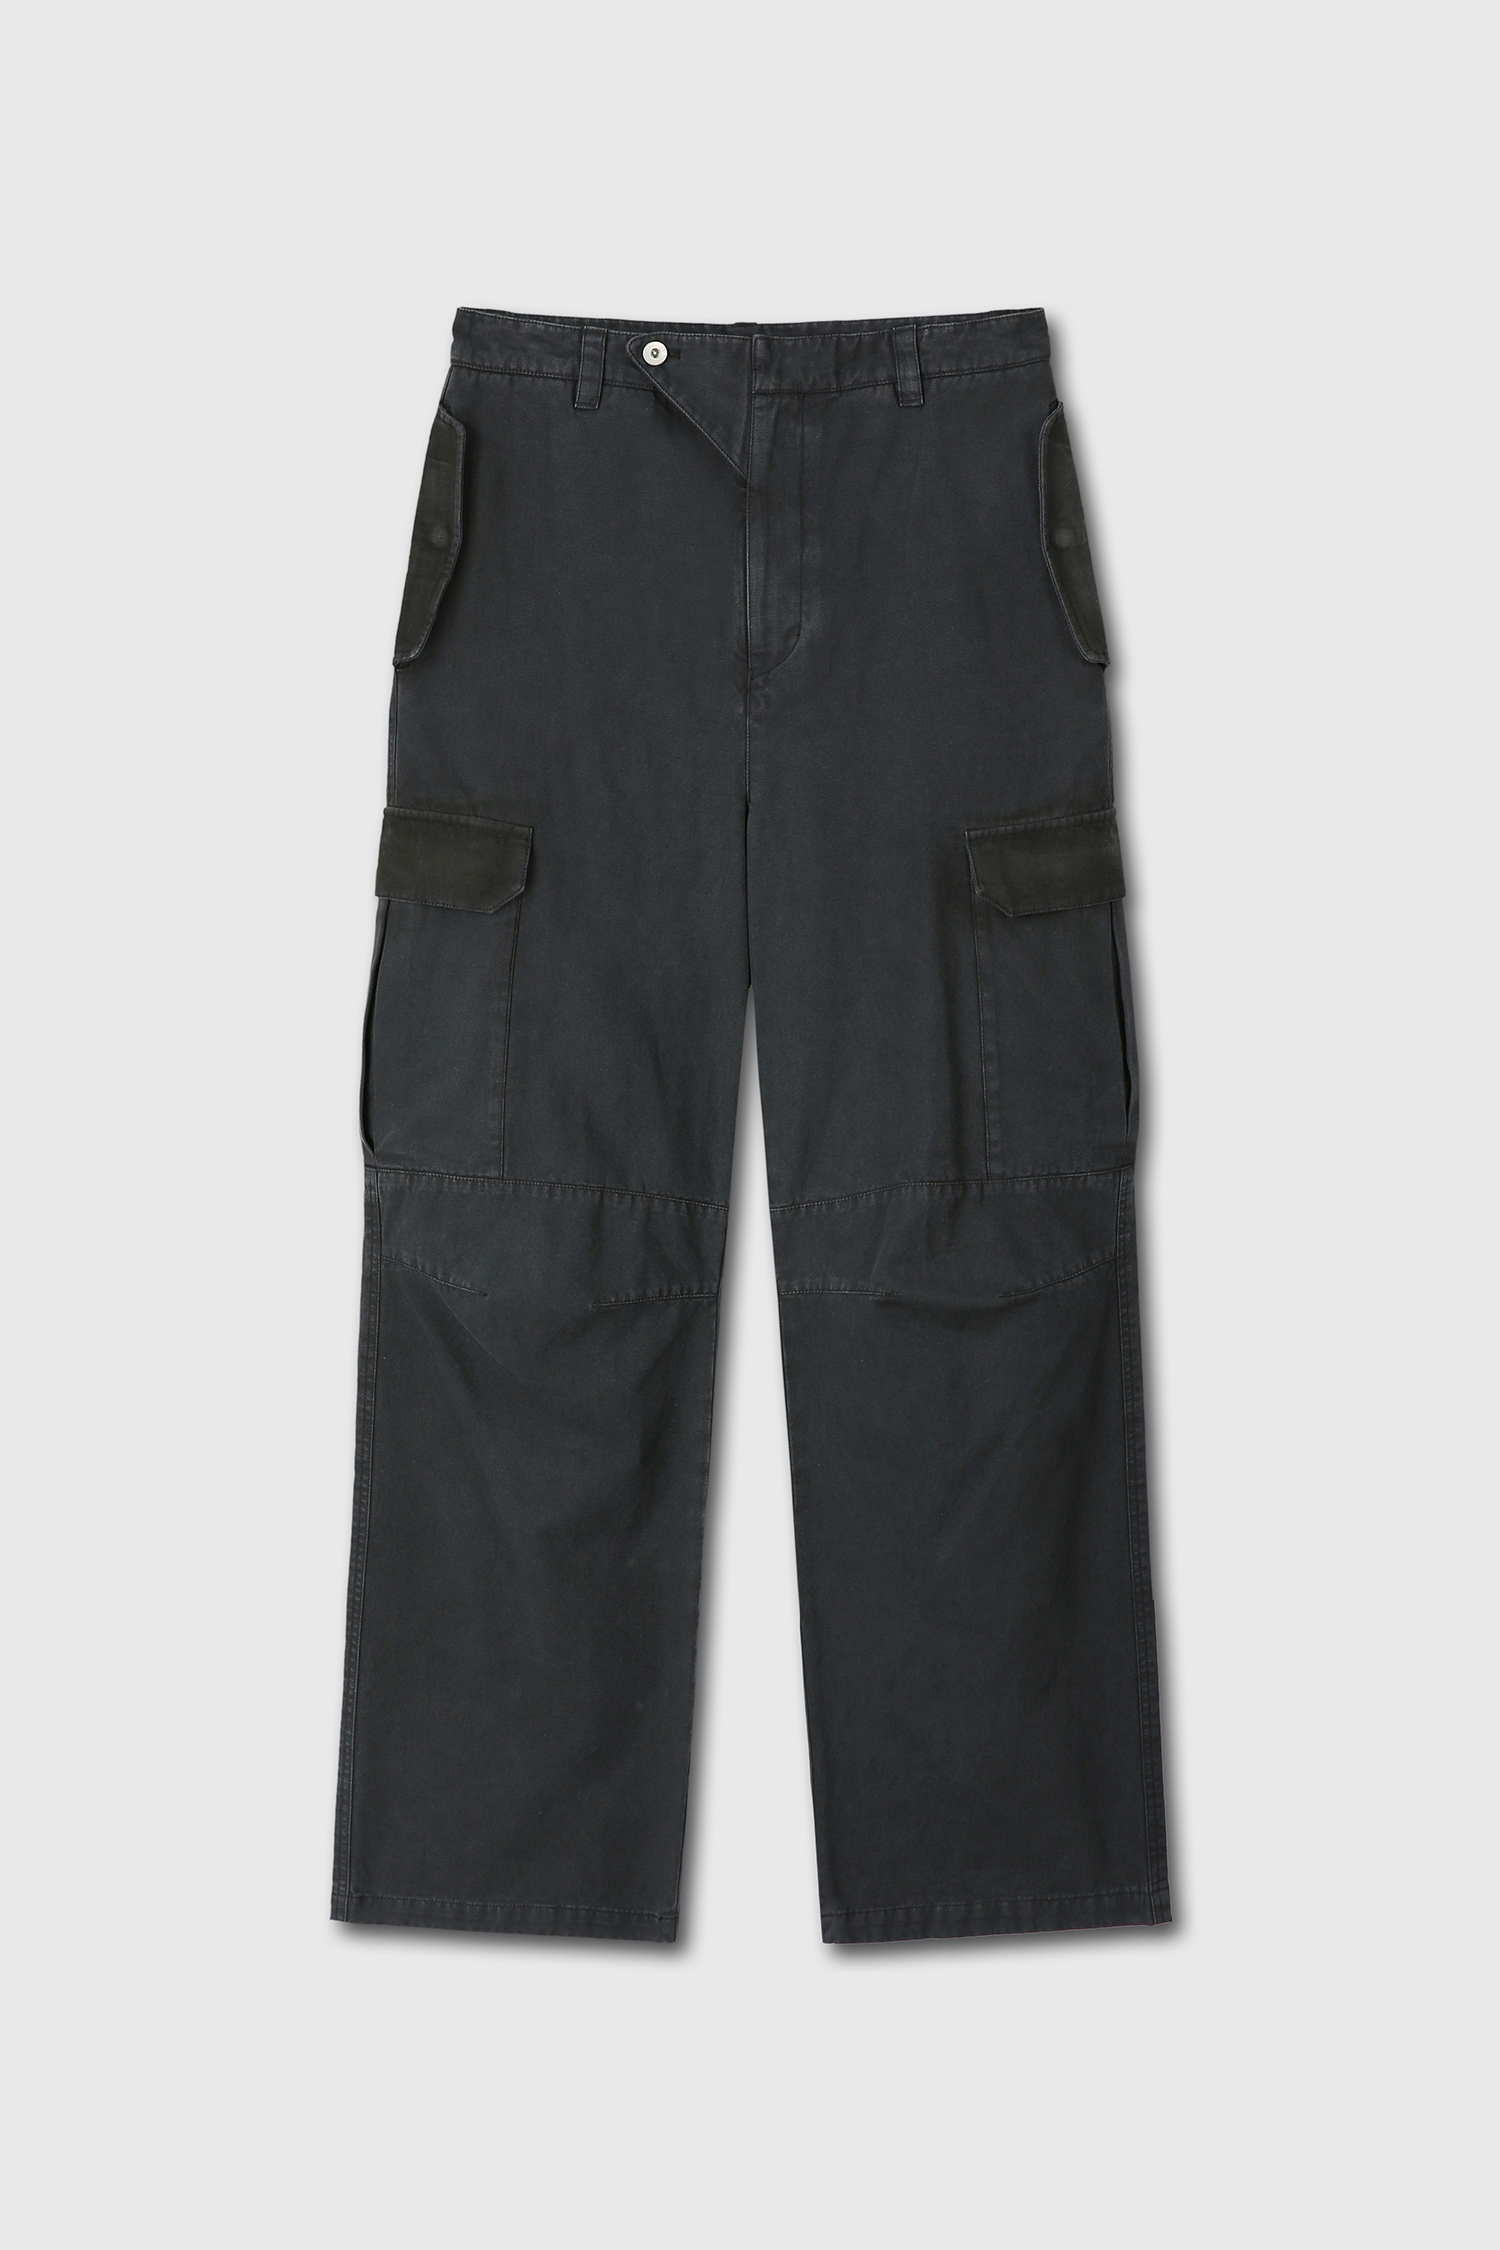 GARMENT-DYEING SIX POCKET CARGO PANTS faded charcoal